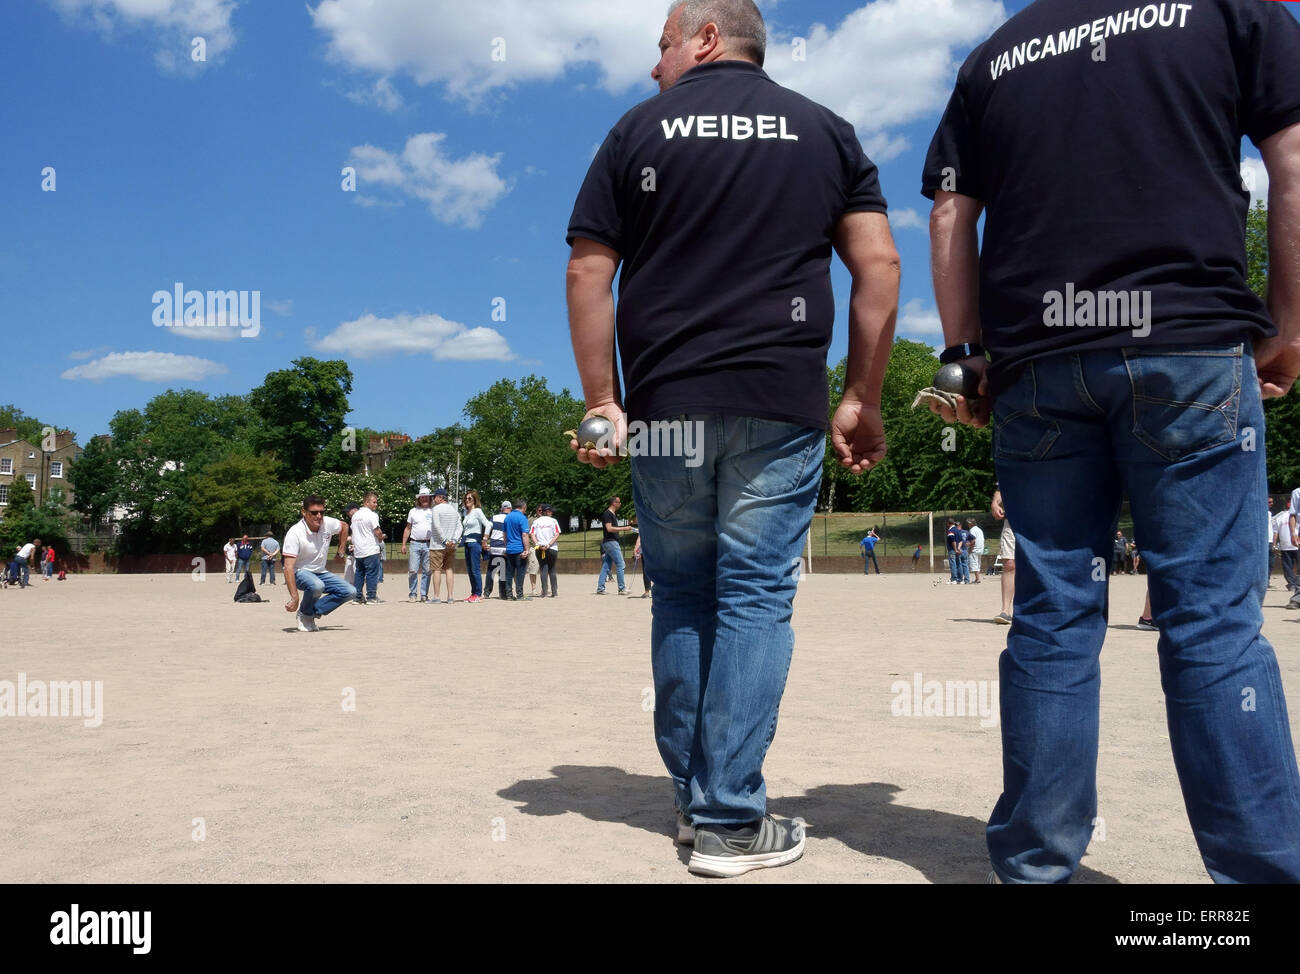 London, UK. 7th June, 2015. The Londonaise 2015 Petanque Tournament reached its final stage in Islington, London today. Teams from far and wide gathered in Barnard Park to compete for the 2,500 Euros prize. Among the players was Charles 'Claudy' Weibel from Belgium who has been World Champion in boules. Credit:  Jeffrey Blackler/Alamy Live News Stock Photo